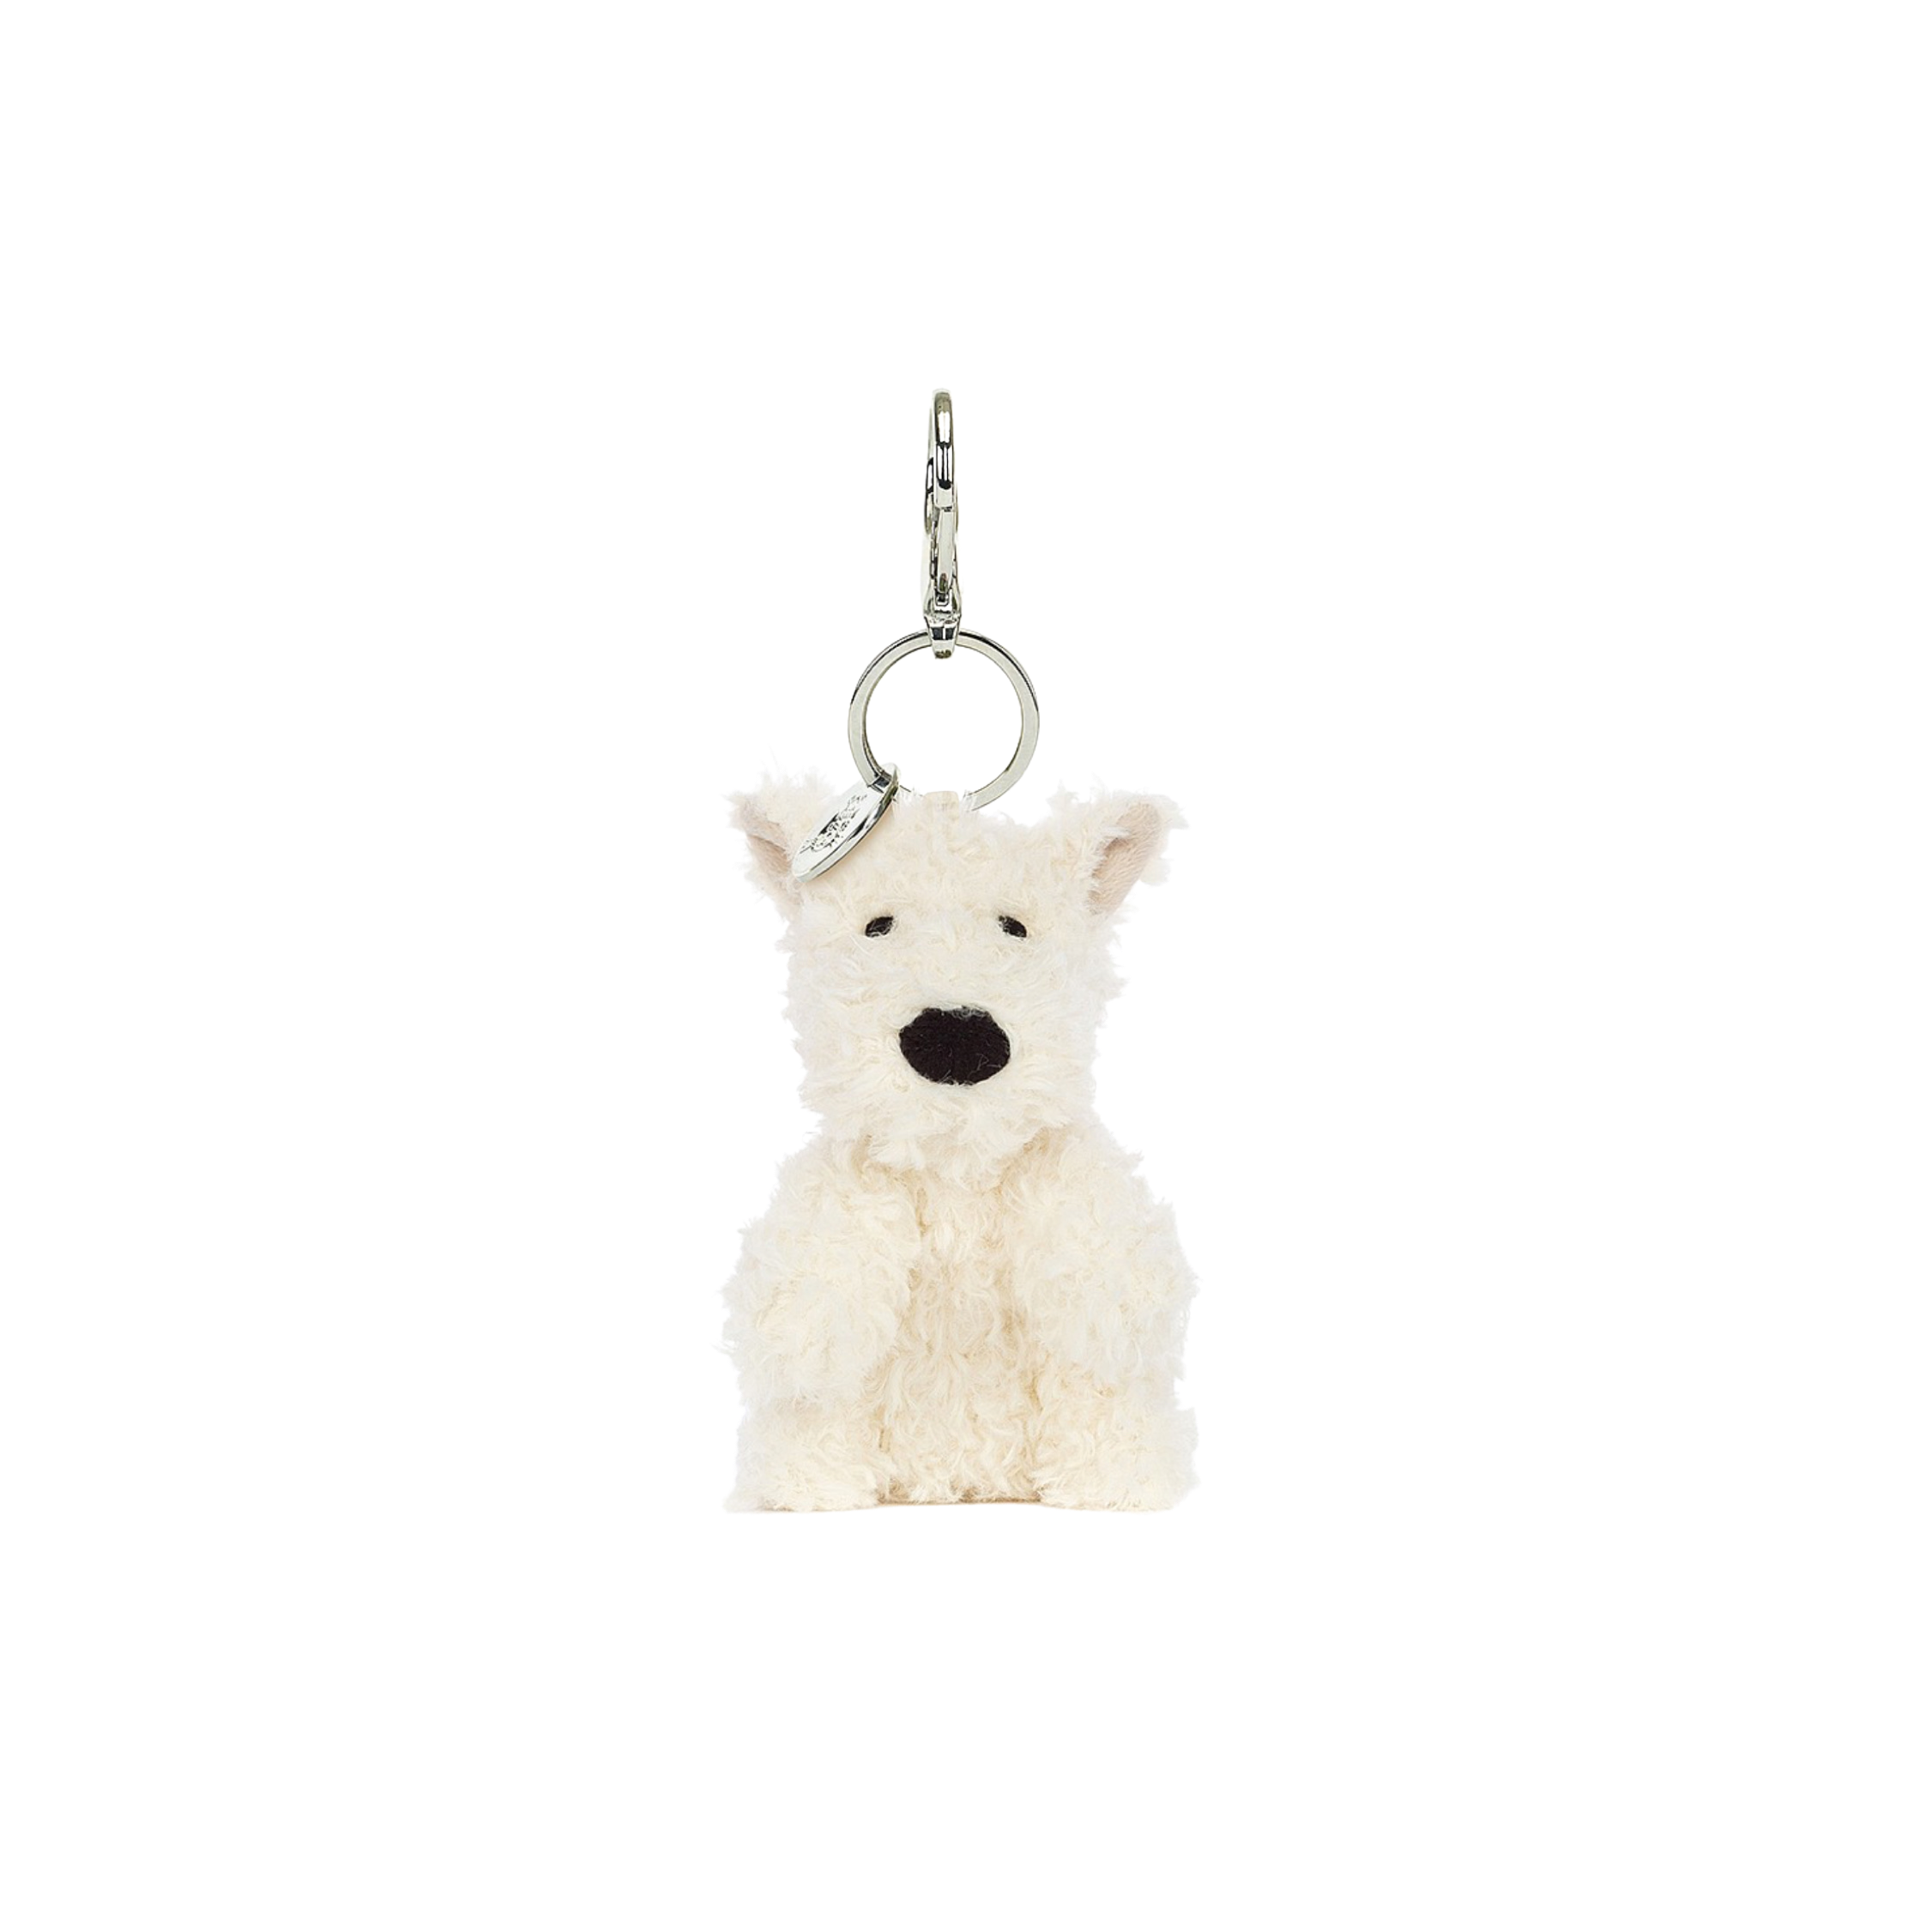 Munro Scottie Dog Bag Charm - Tadpoles and Tiddlers